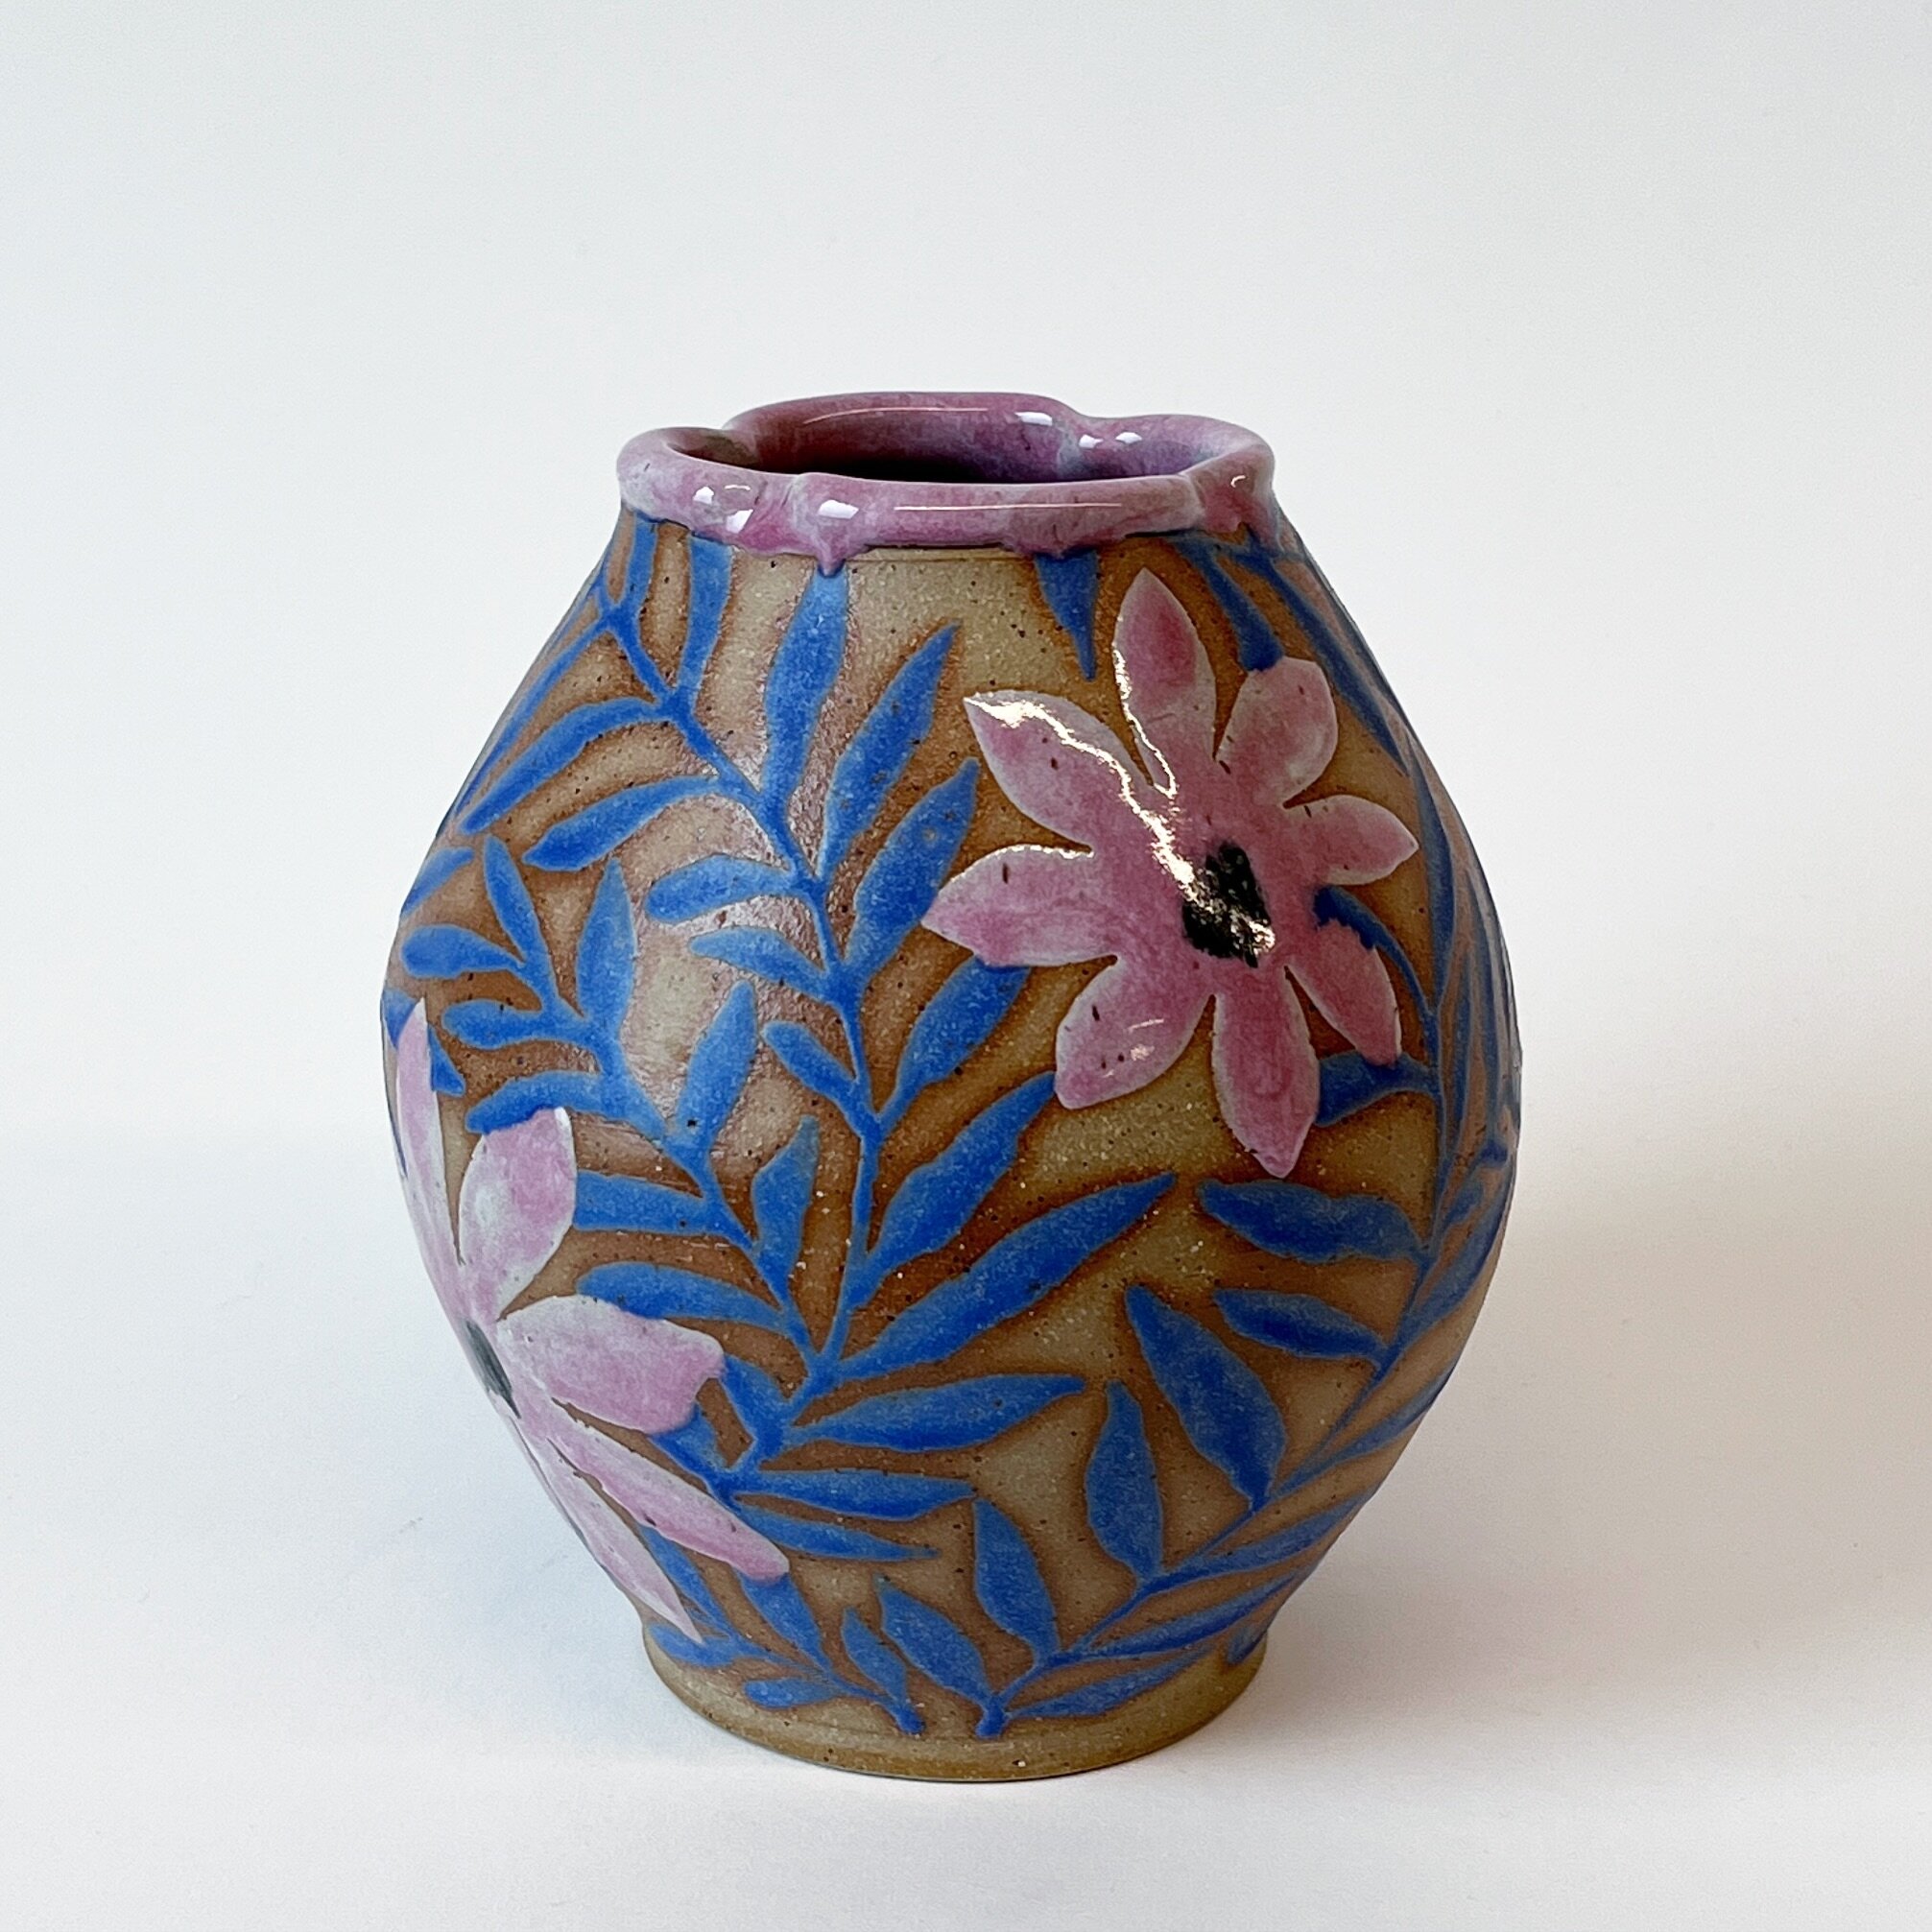 Find this vase and me at @pennmuseum today from 10-4pm as part of Culture Fest along with @theclaystudiophl and @cel.fel .

There will be throwing demonstrations, dance, music and story telling for you to enjoy plus visiting the museum.

Photo: round